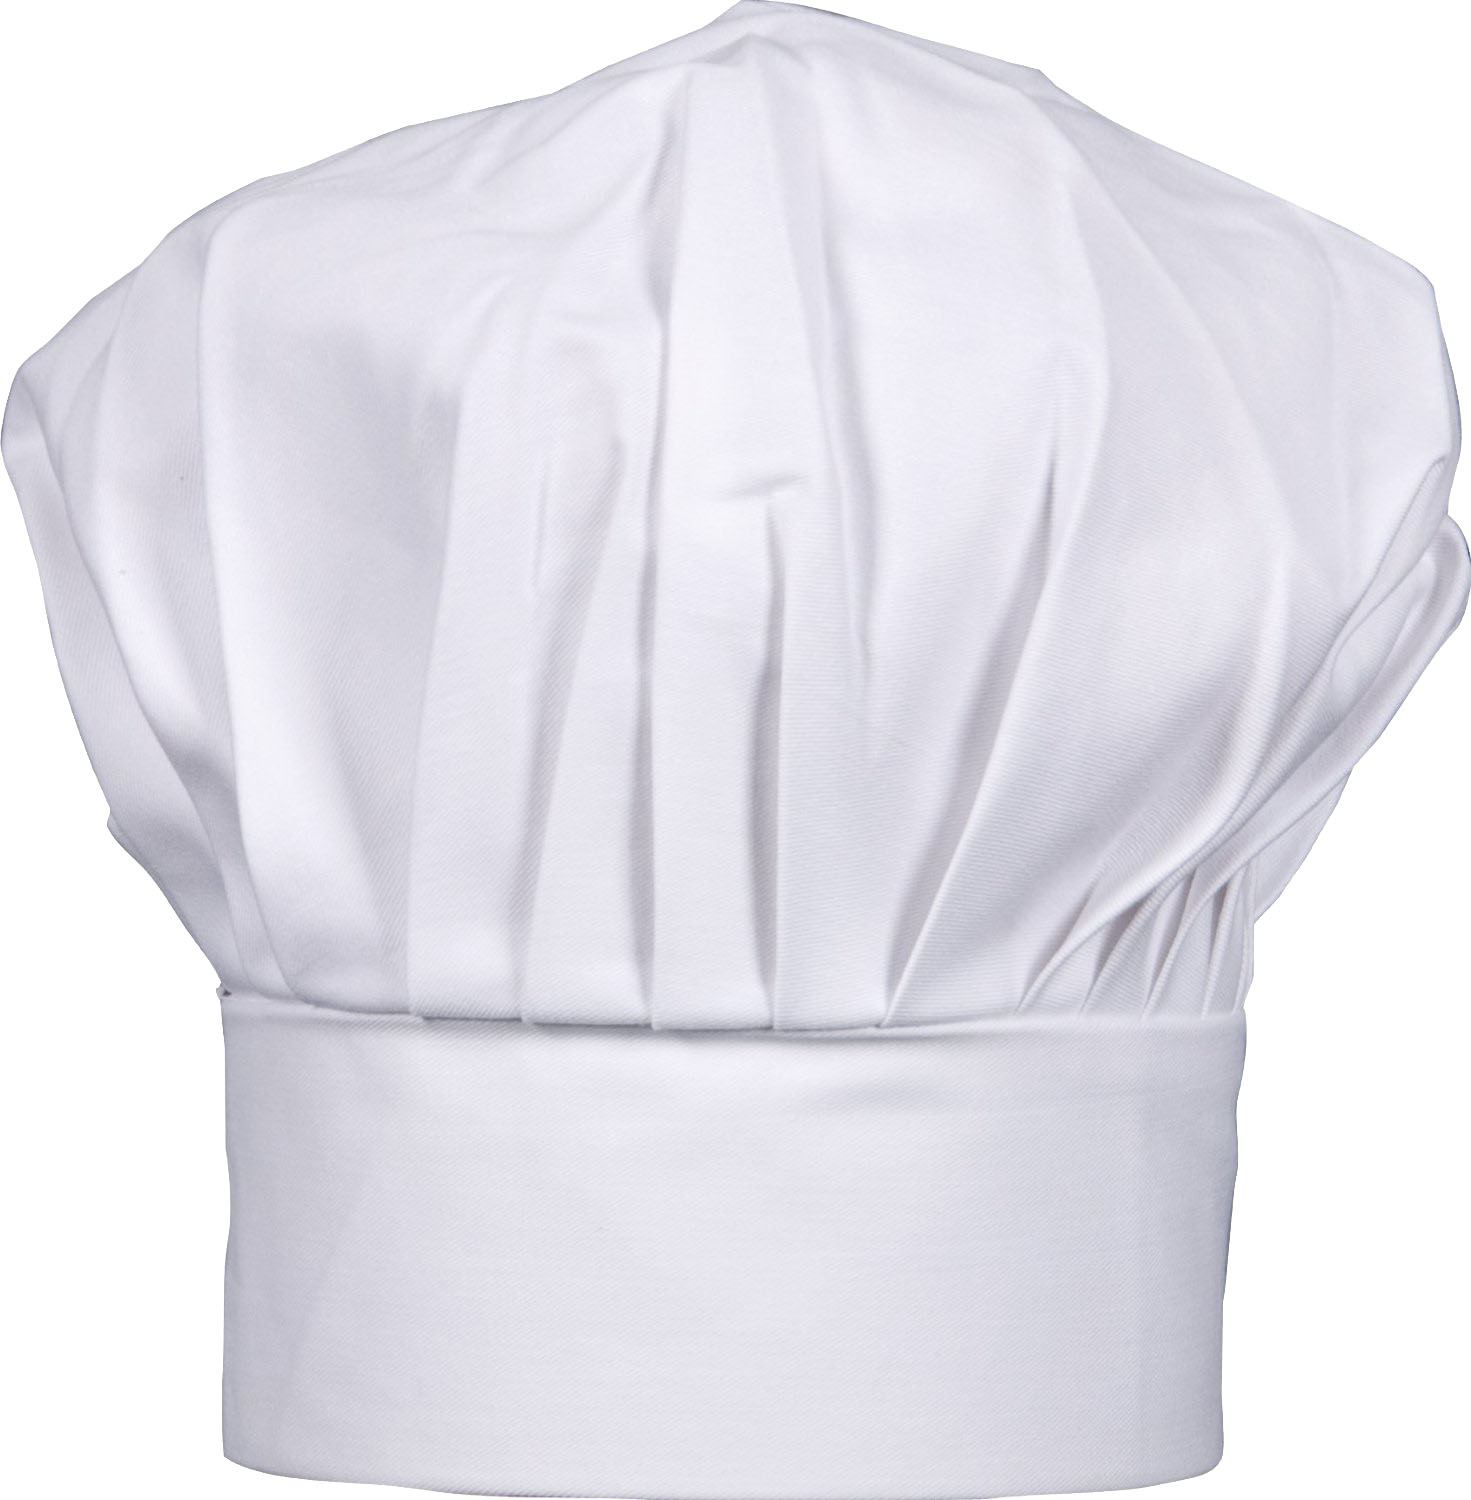 Yellow Chef Hat.png